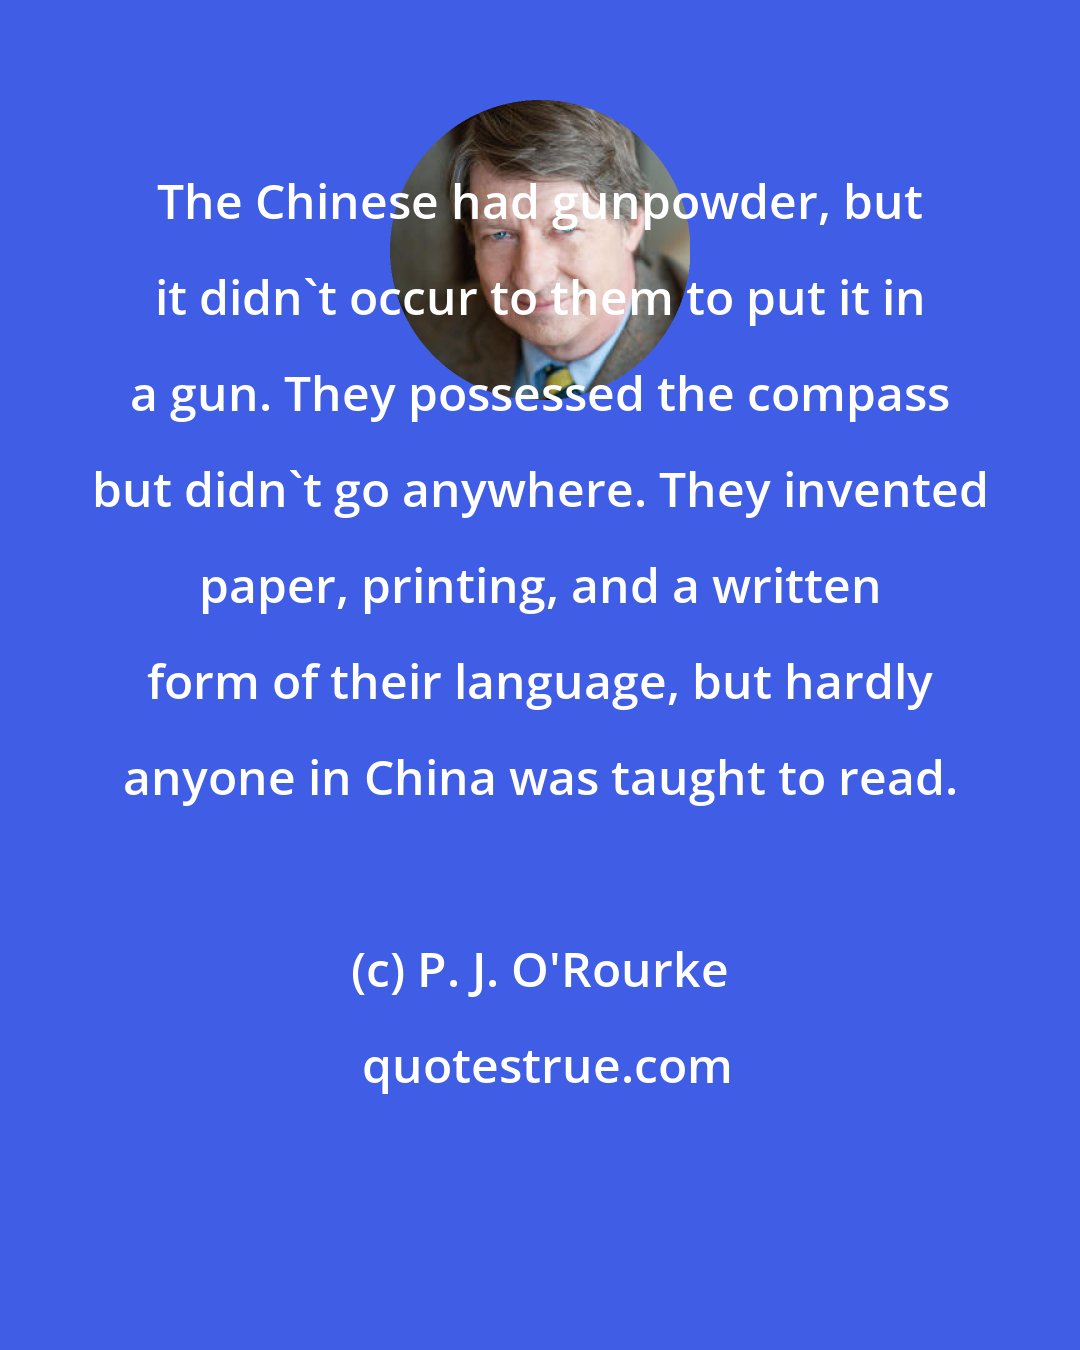 P. J. O'Rourke: The Chinese had gunpowder, but it didn't occur to them to put it in a gun. They possessed the compass but didn't go anywhere. They invented paper, printing, and a written form of their language, but hardly anyone in China was taught to read.